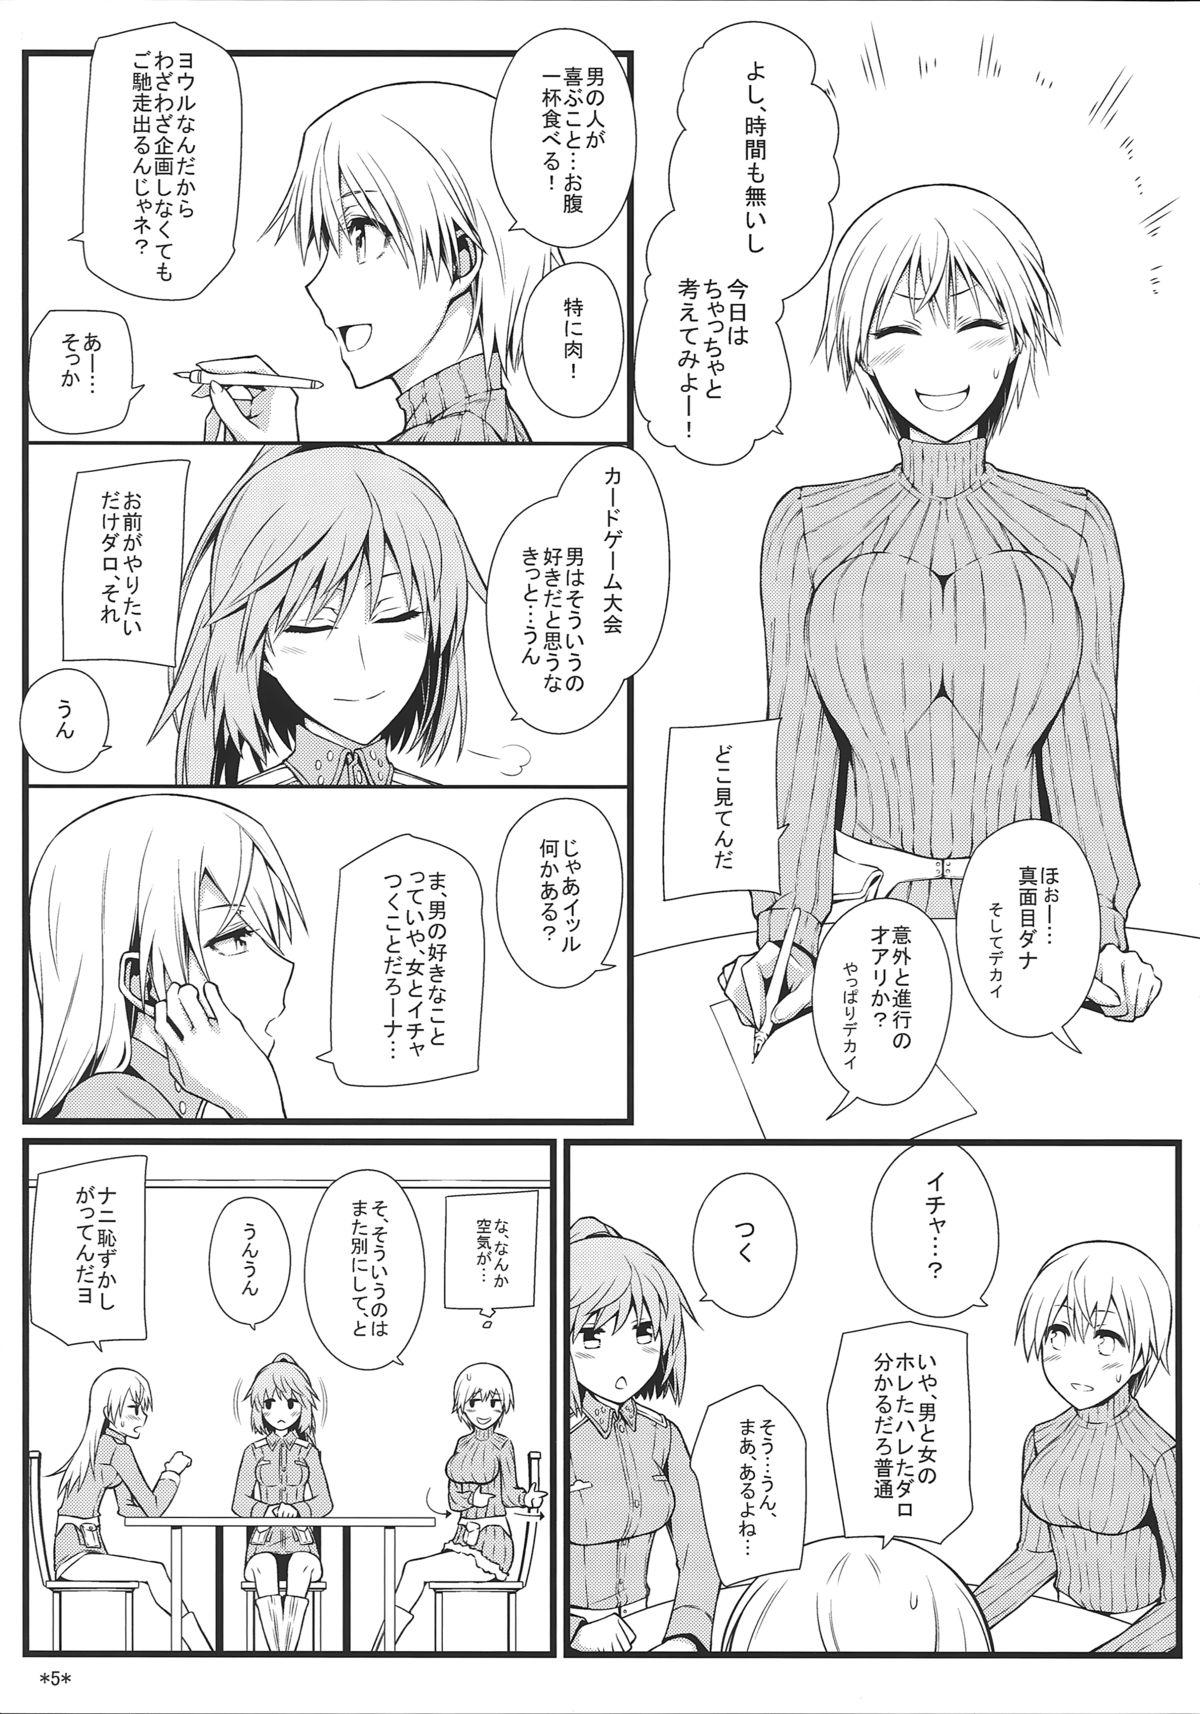 Relax KARLSLAND SYNDROME 3 - Strike witches Filipina - Page 7